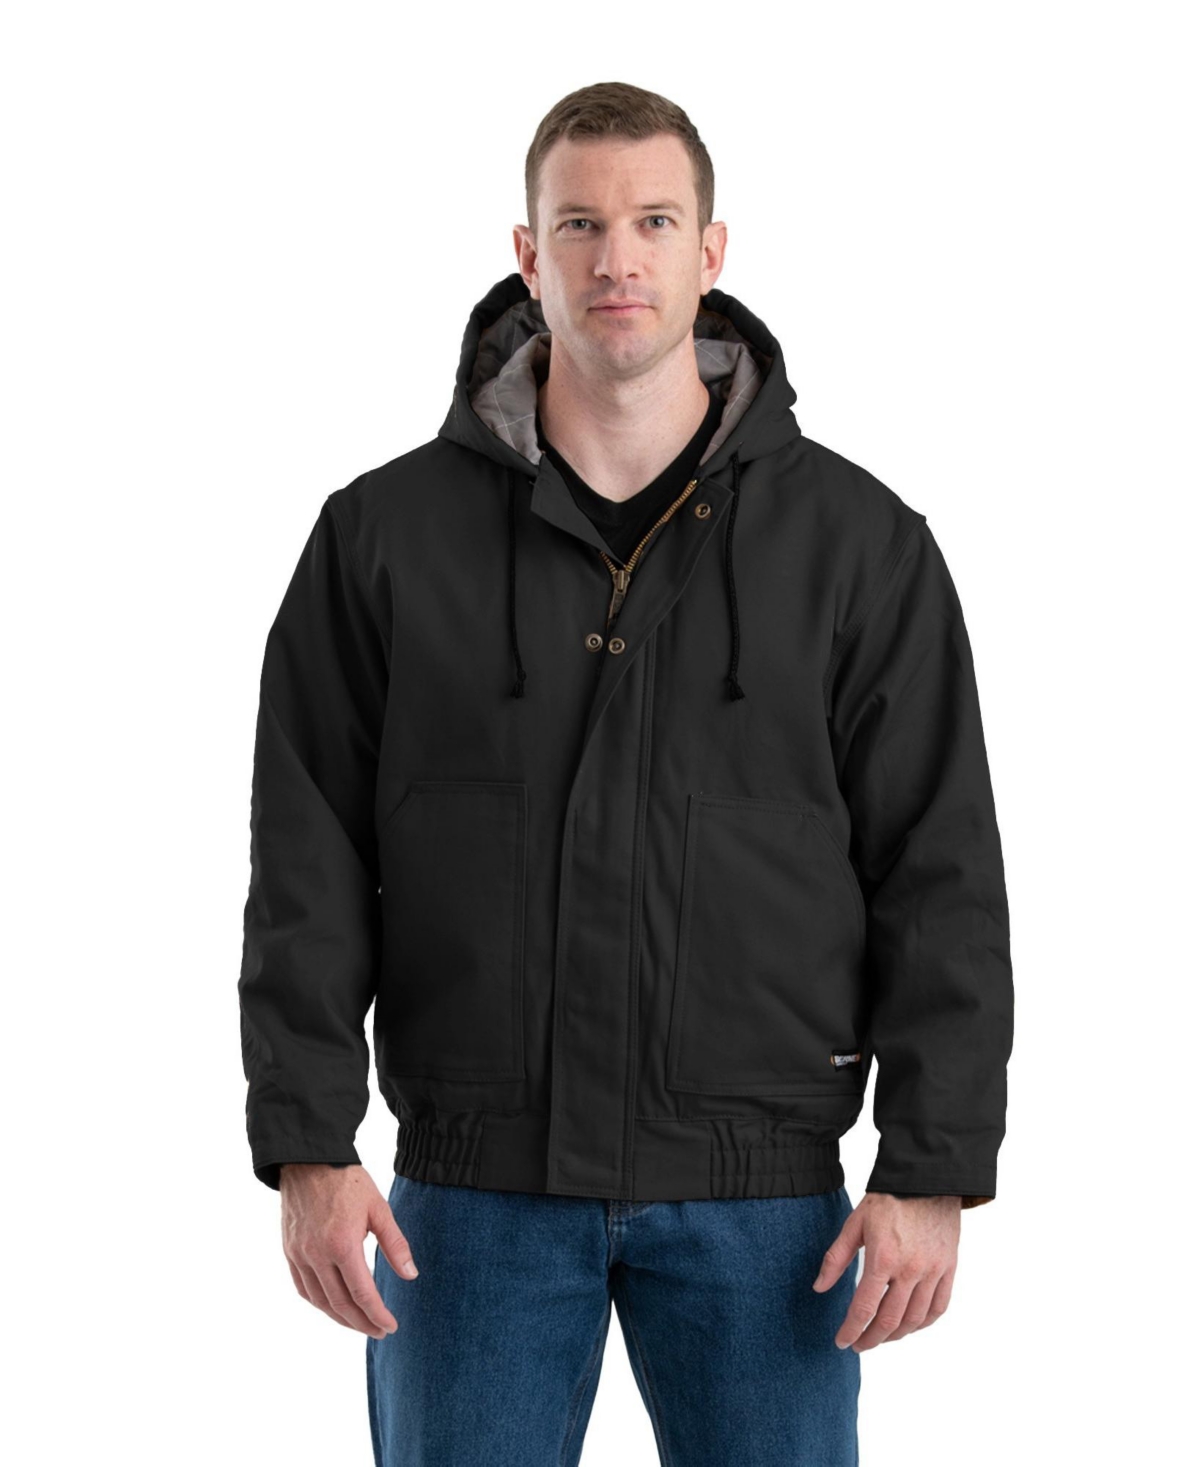 Big & Tall Flame Resistant Duck Hooded Jacket - Black